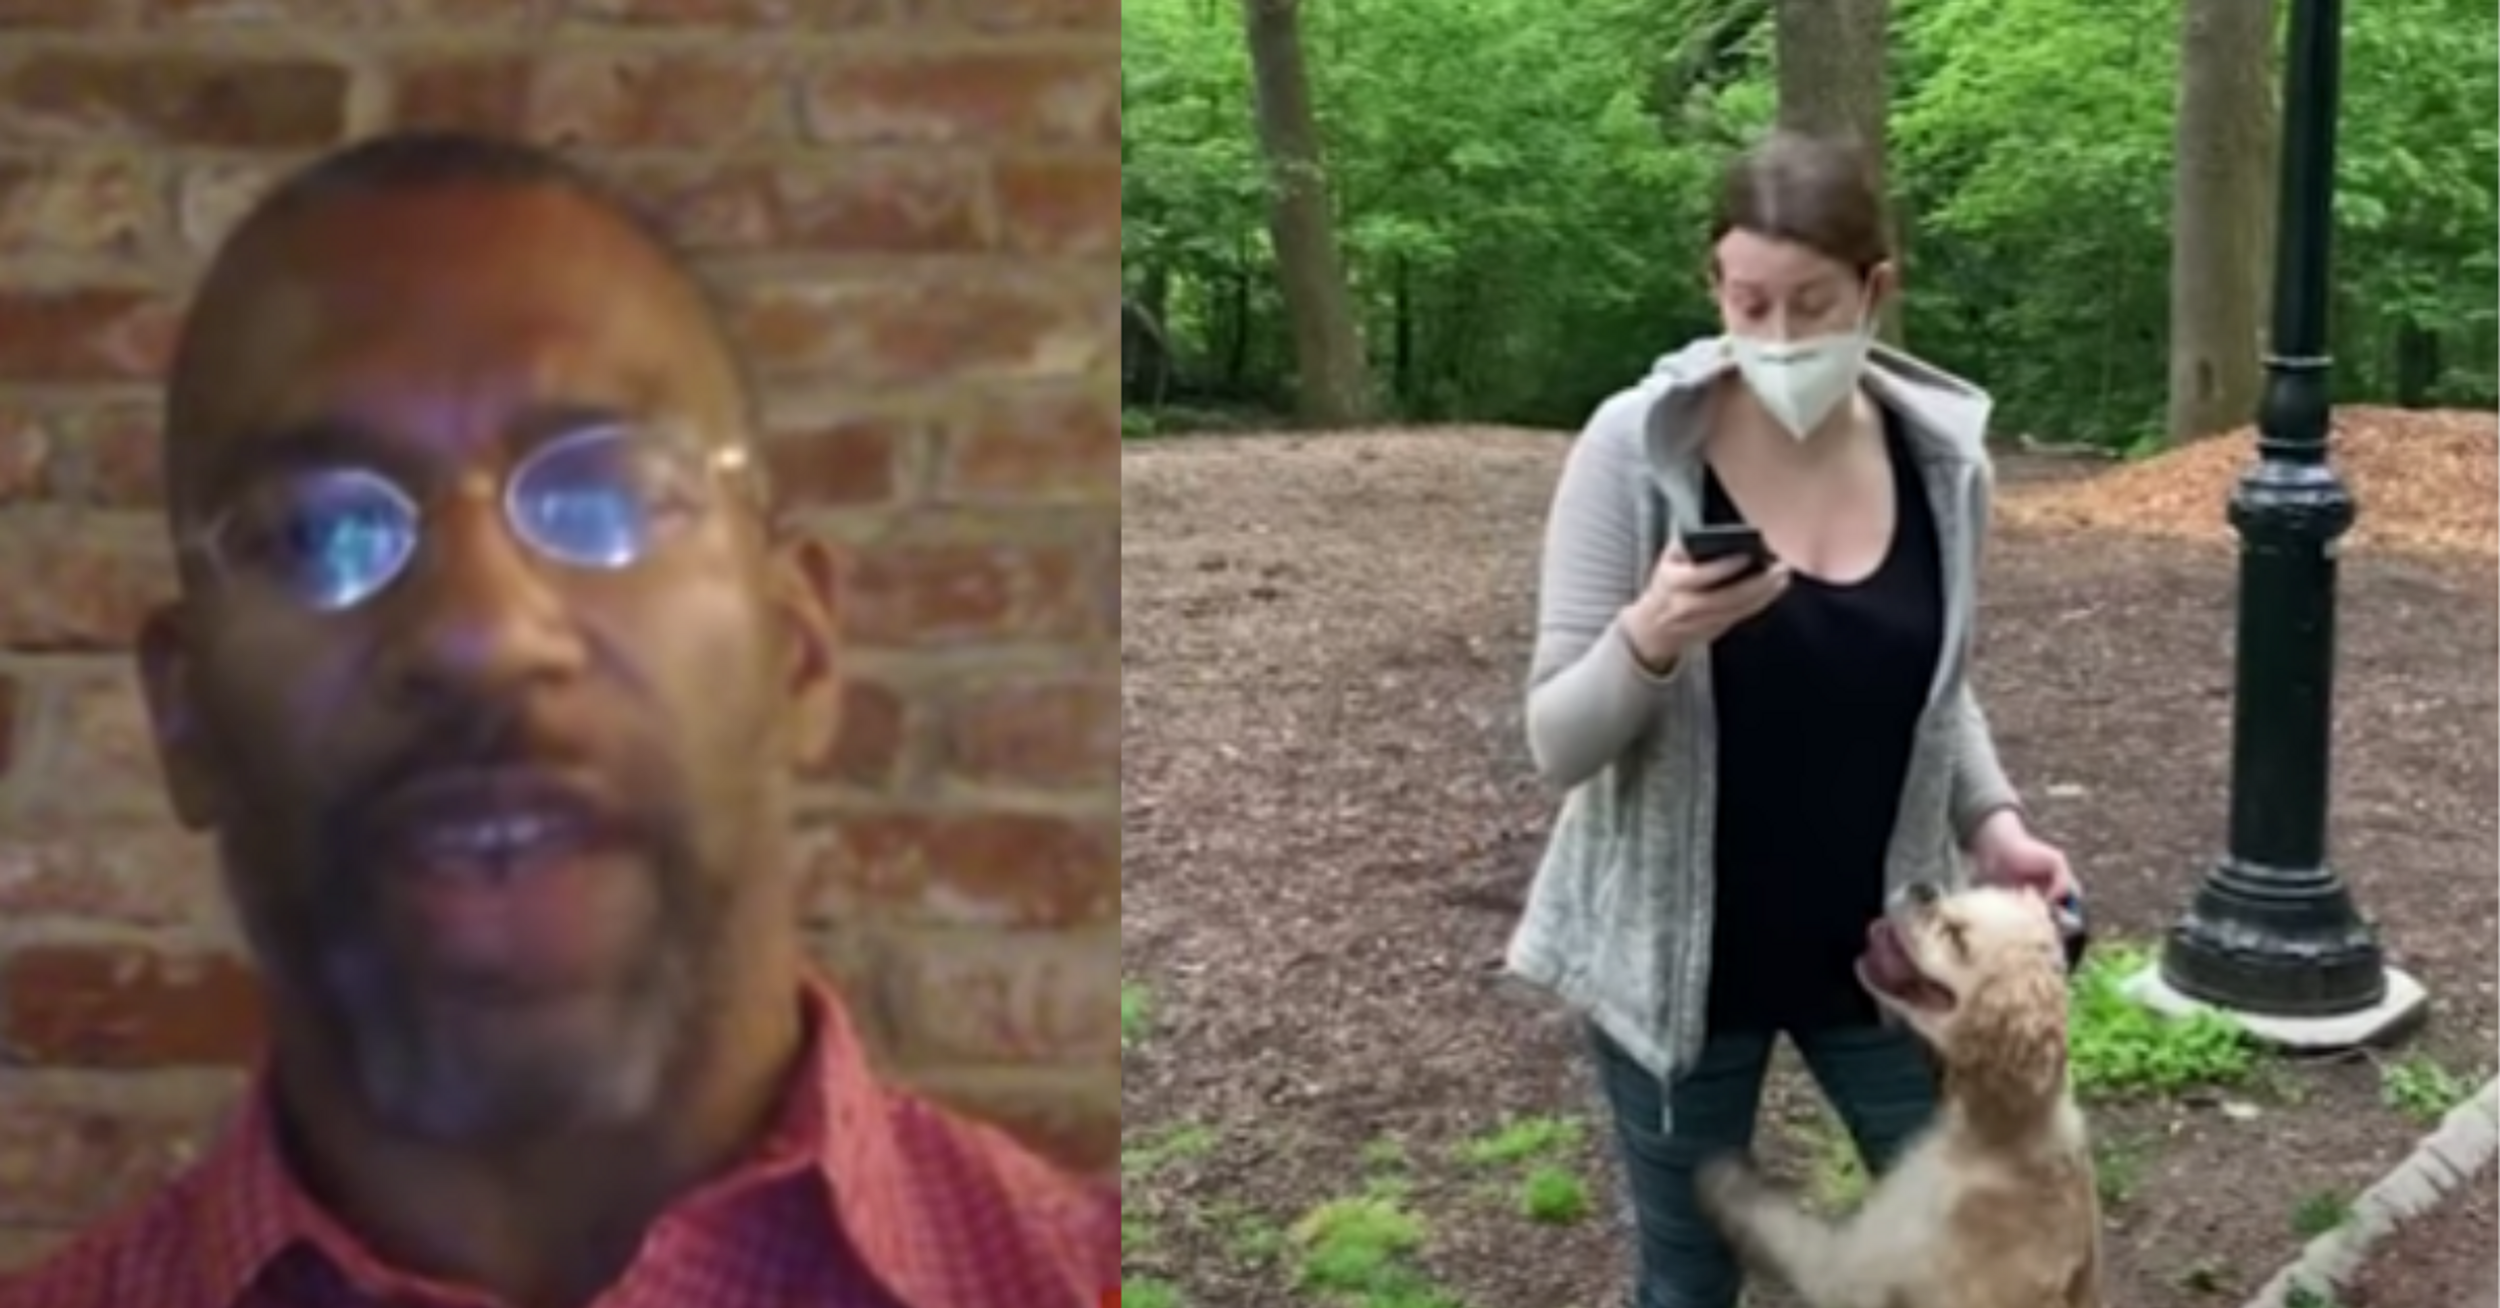 Central Park Birdwatcher Says Torrent Of Death Threats Against Woman Who Called Cops Needs To 'Stop Immediately'